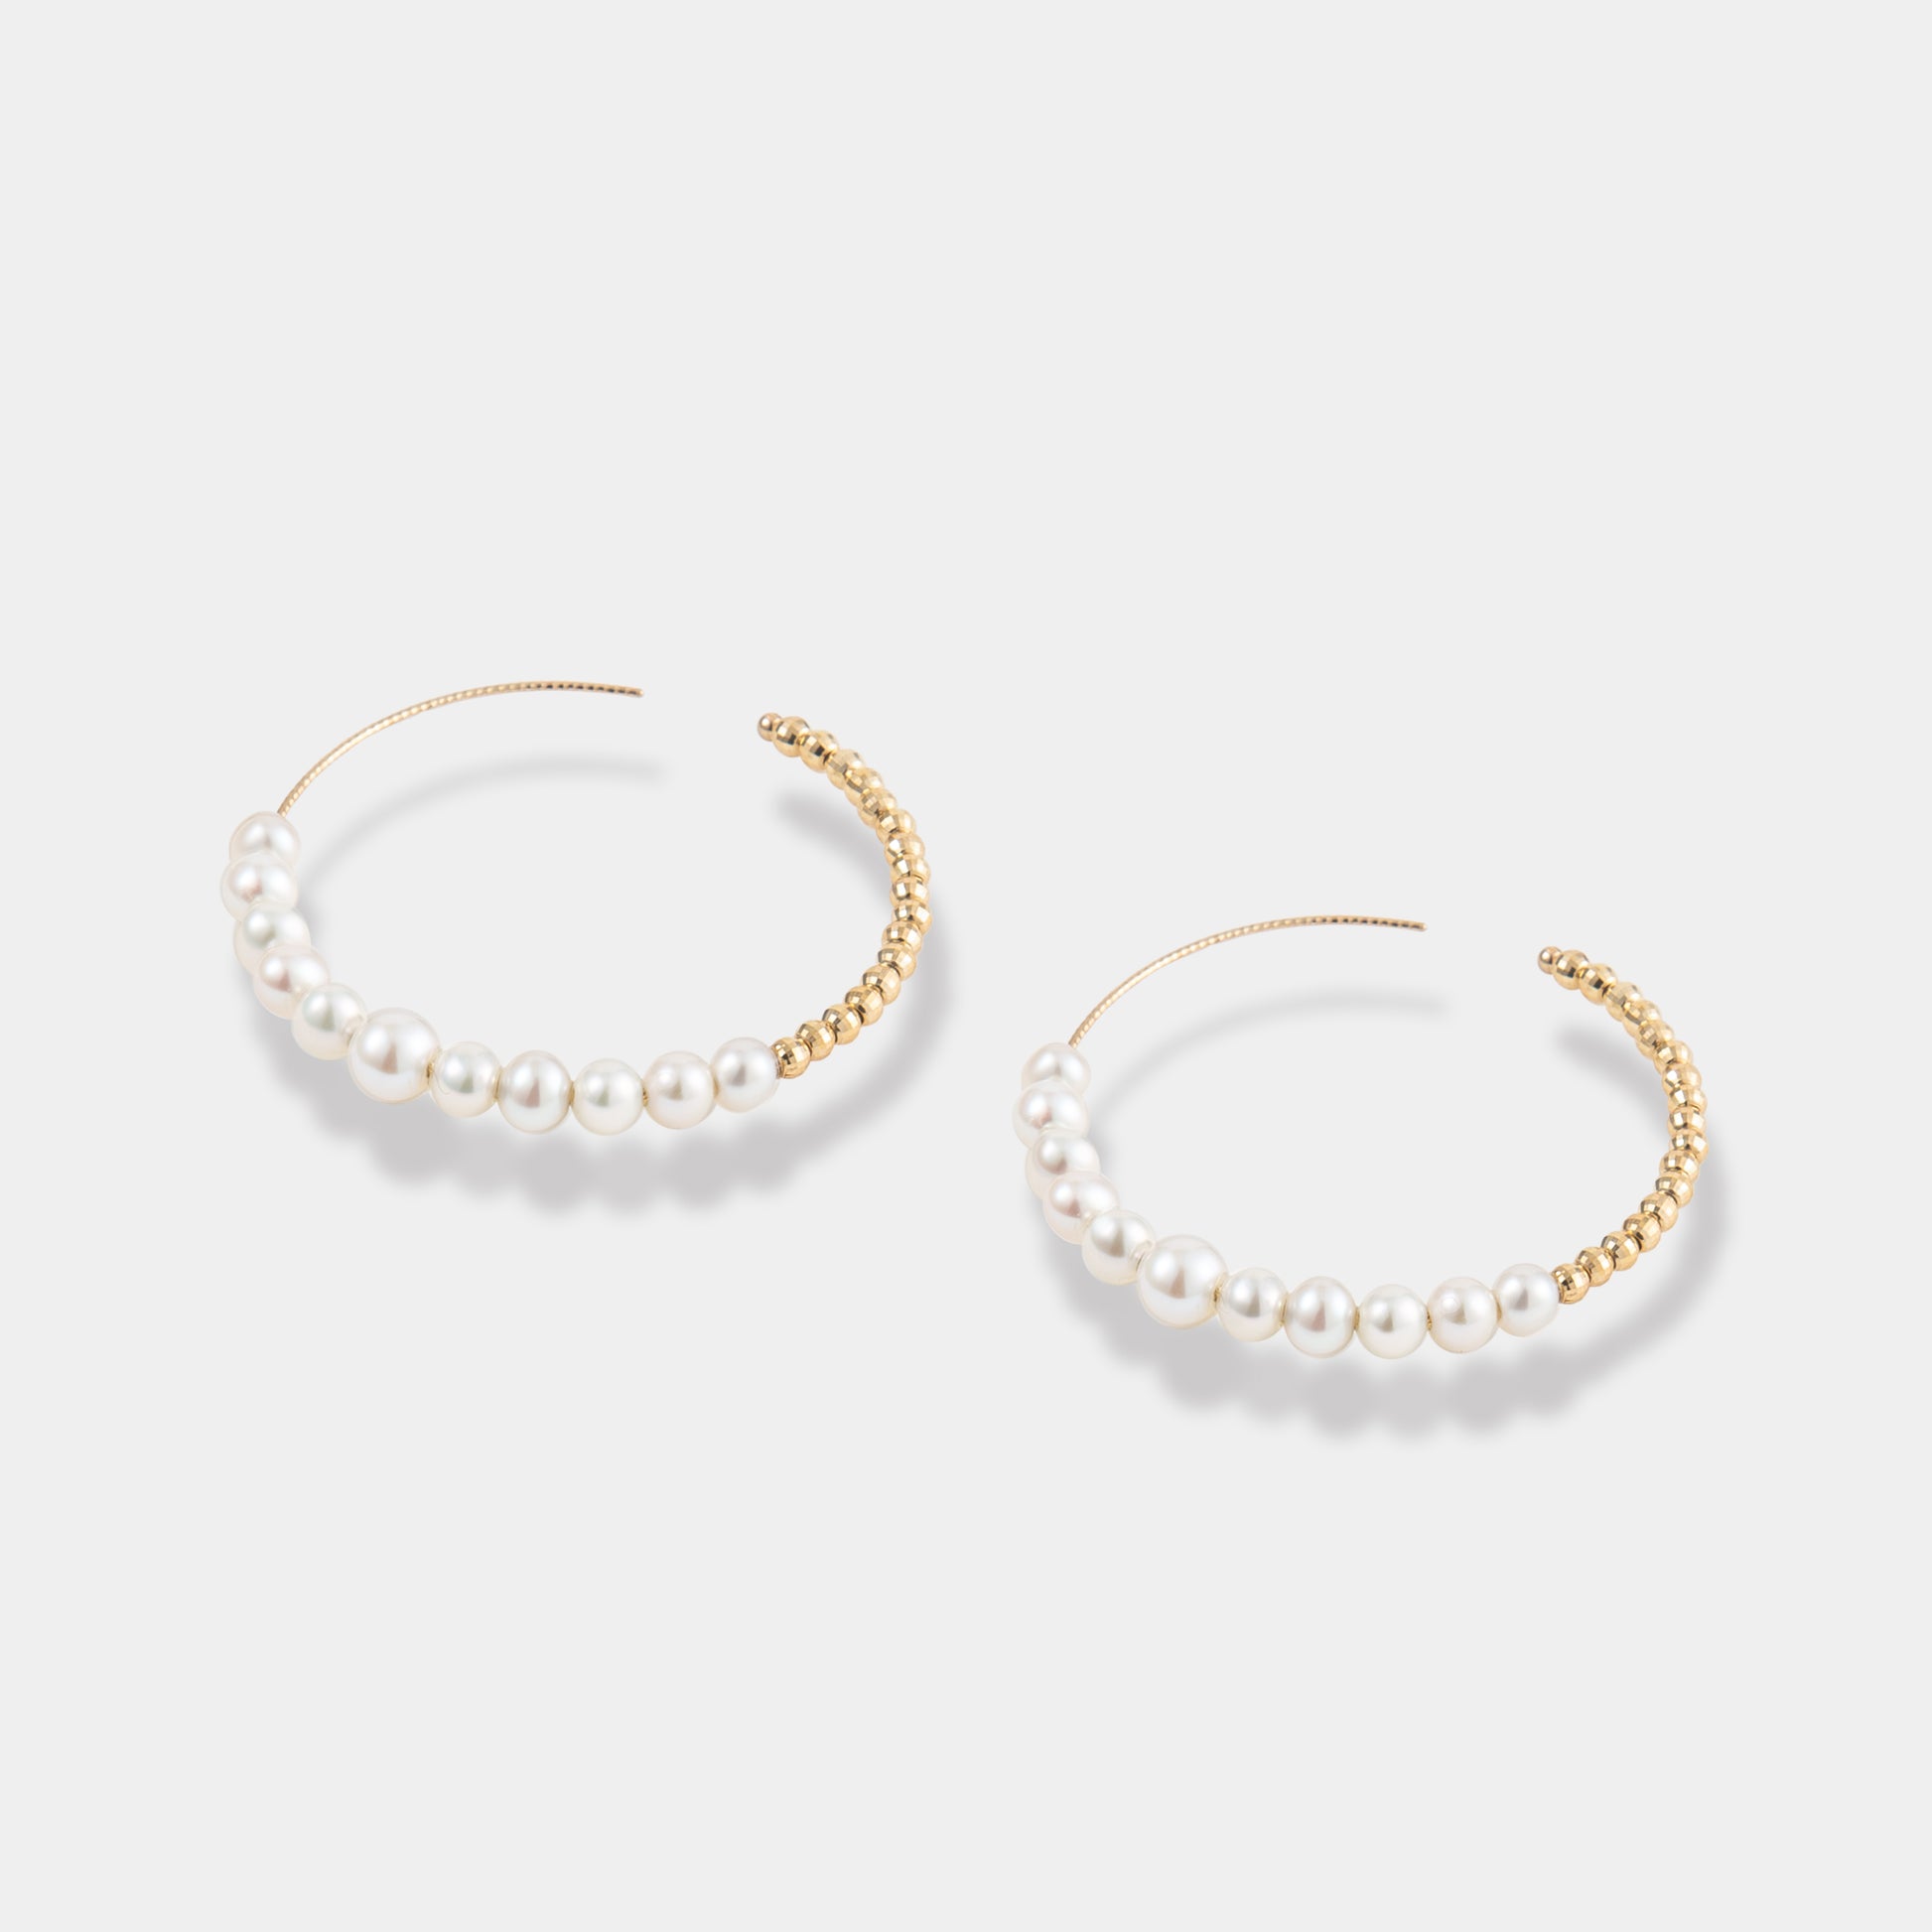 Stunning gold and pearl hoop earrings, a chic and timeless addition to your jewelry collection.